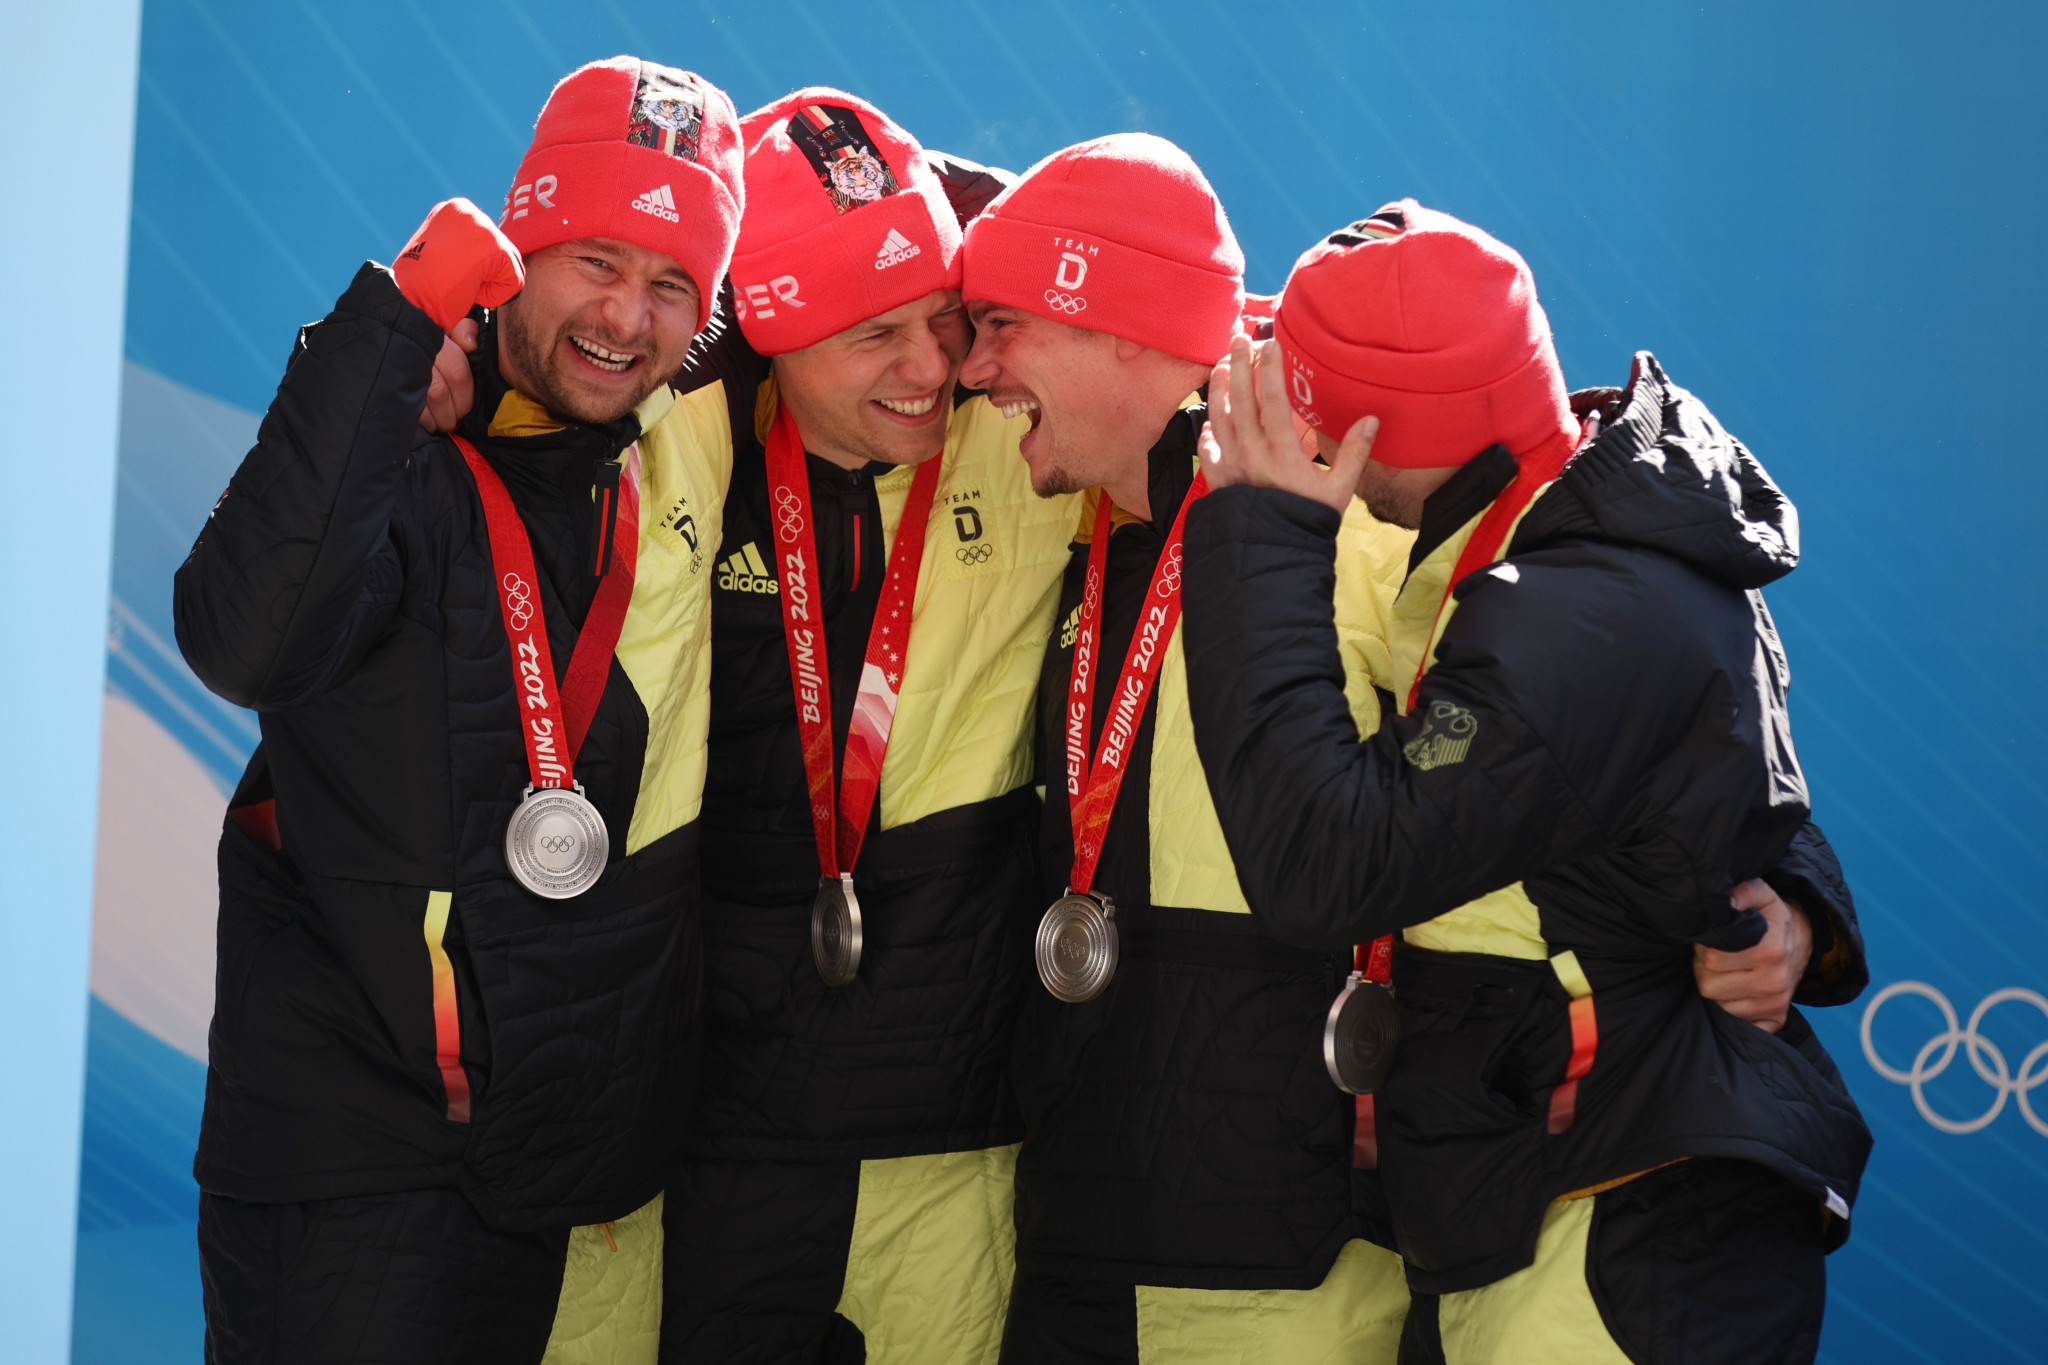 Johannes Lochner, pictured with his four-man bobsleigh team, won his second silver medal at Beijing 2022 ©Getty Images